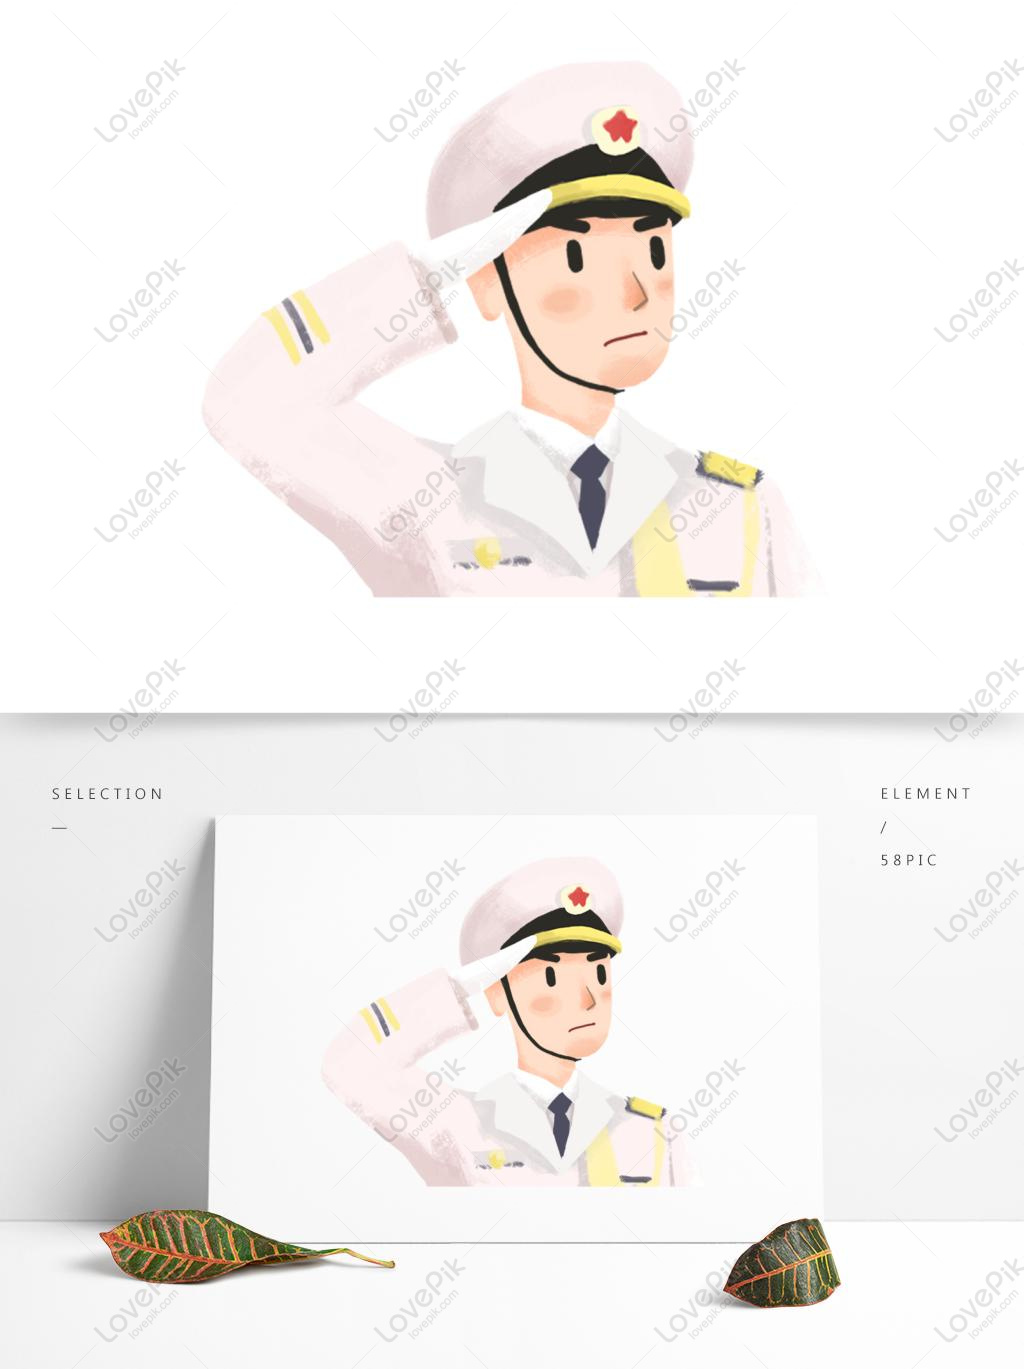 Hand Drawn Cartoon Navy Marching Ceremony Original Elements PNG Image PSD  images free download_1369 × 1024 px - Lovepik